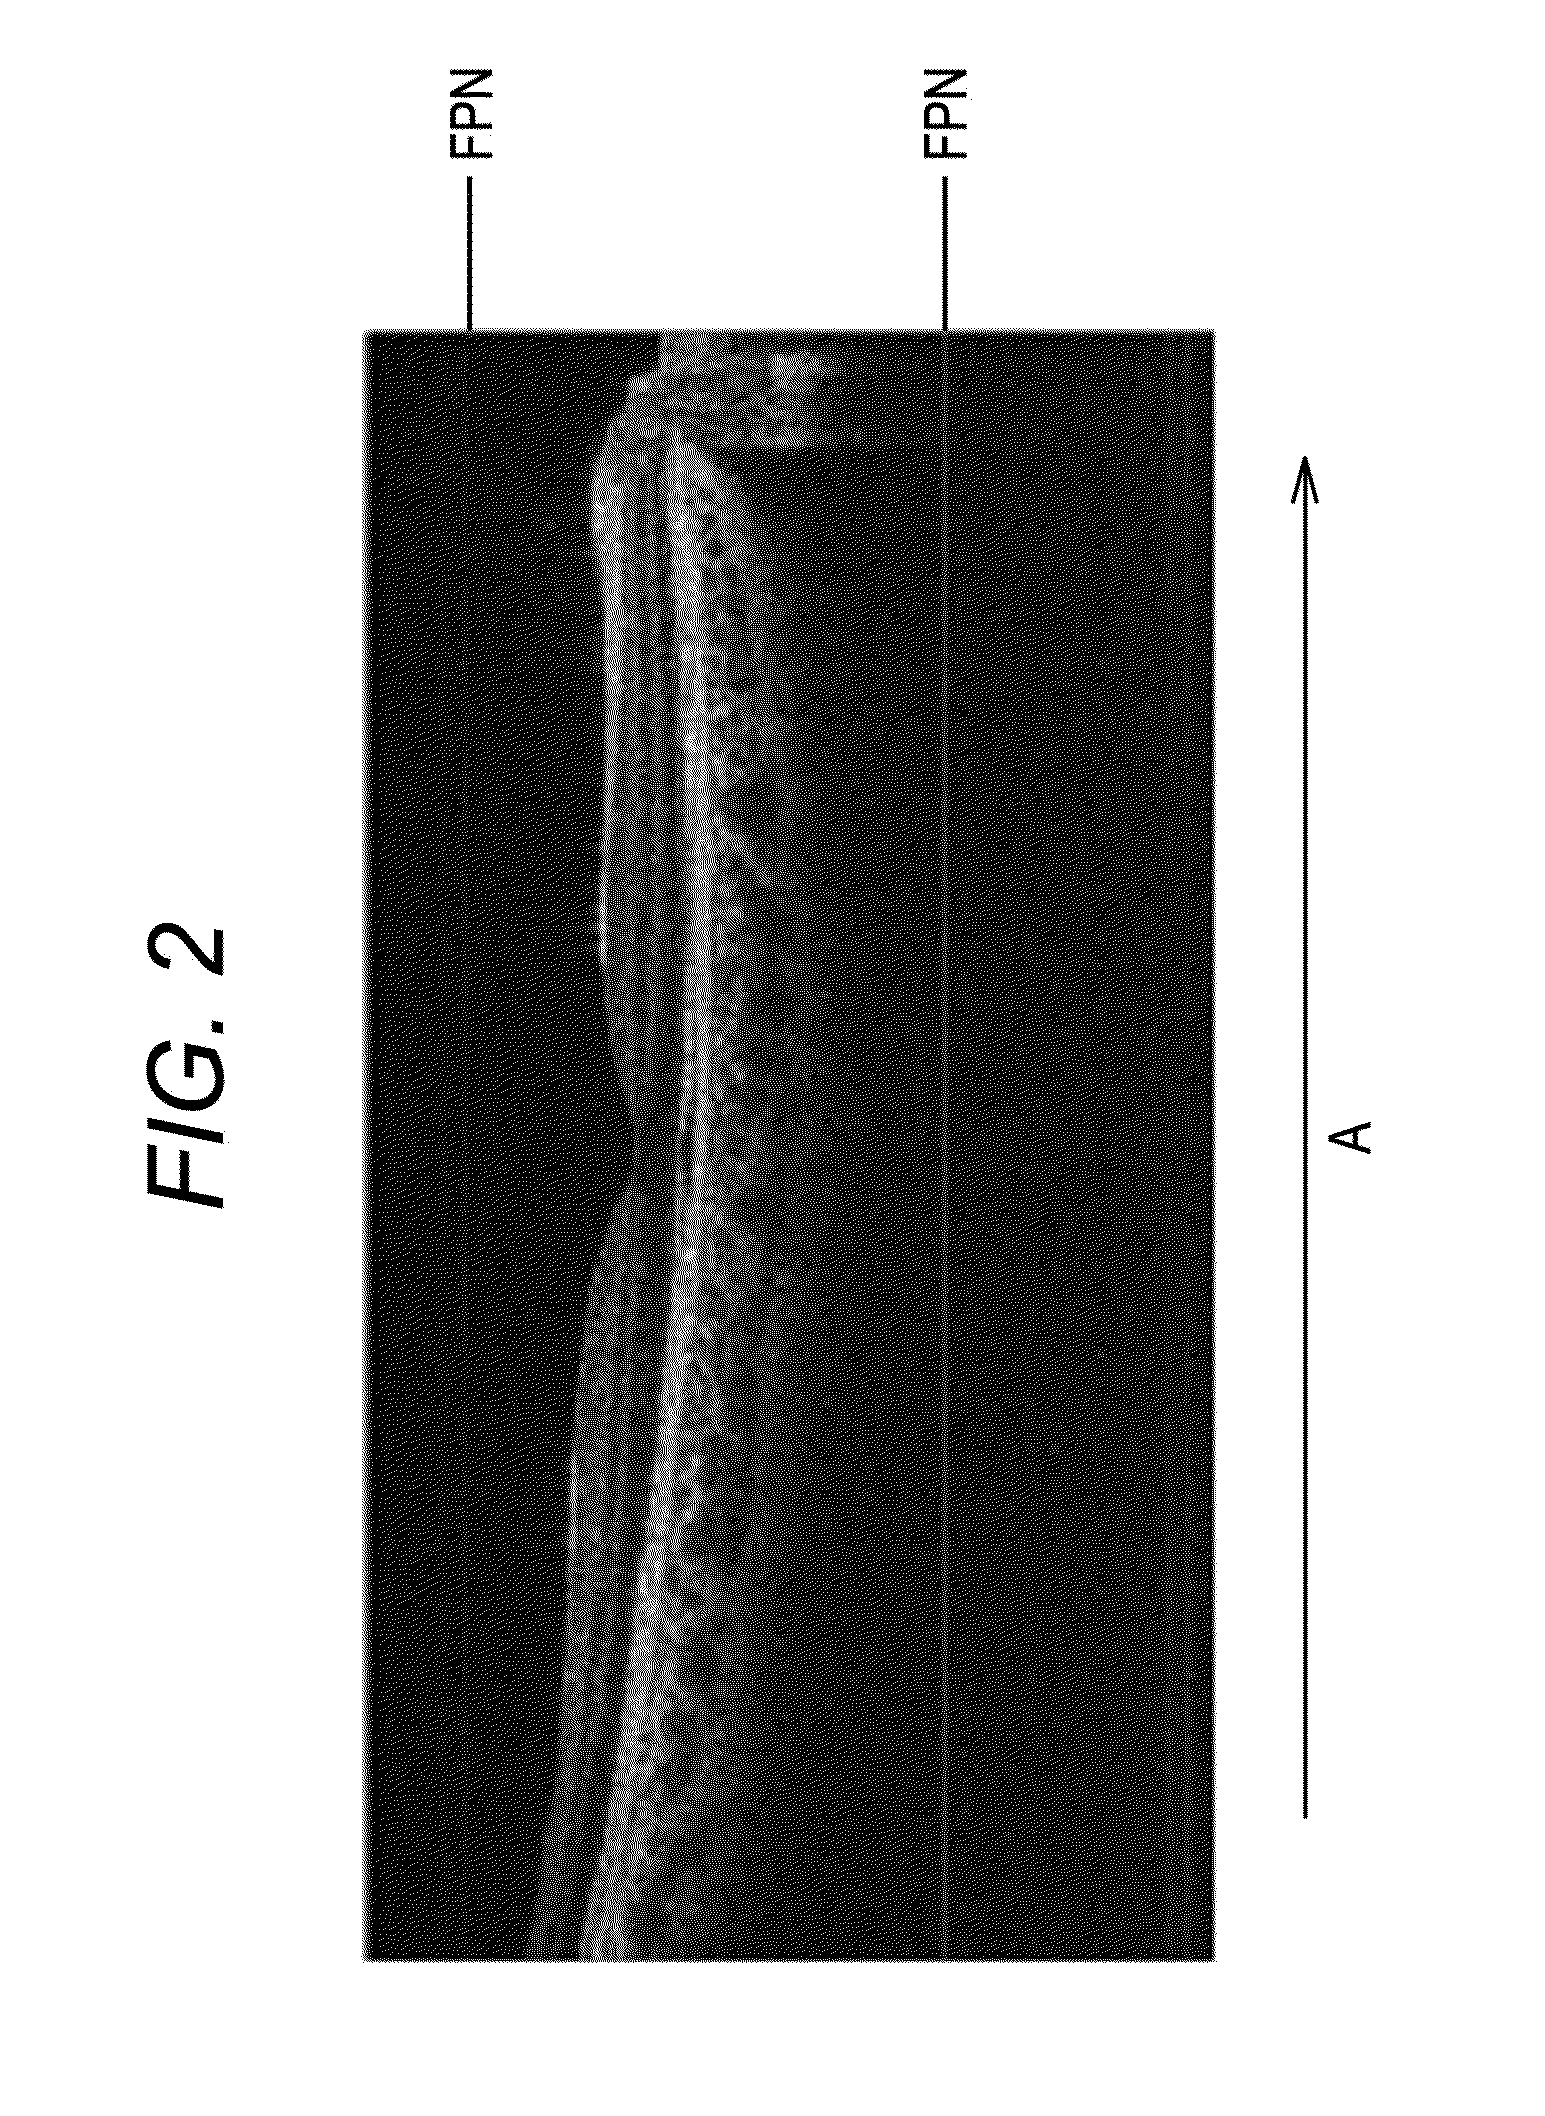 Method for reducing noise in tomographic image and recording medium having noise reducing program stored therein